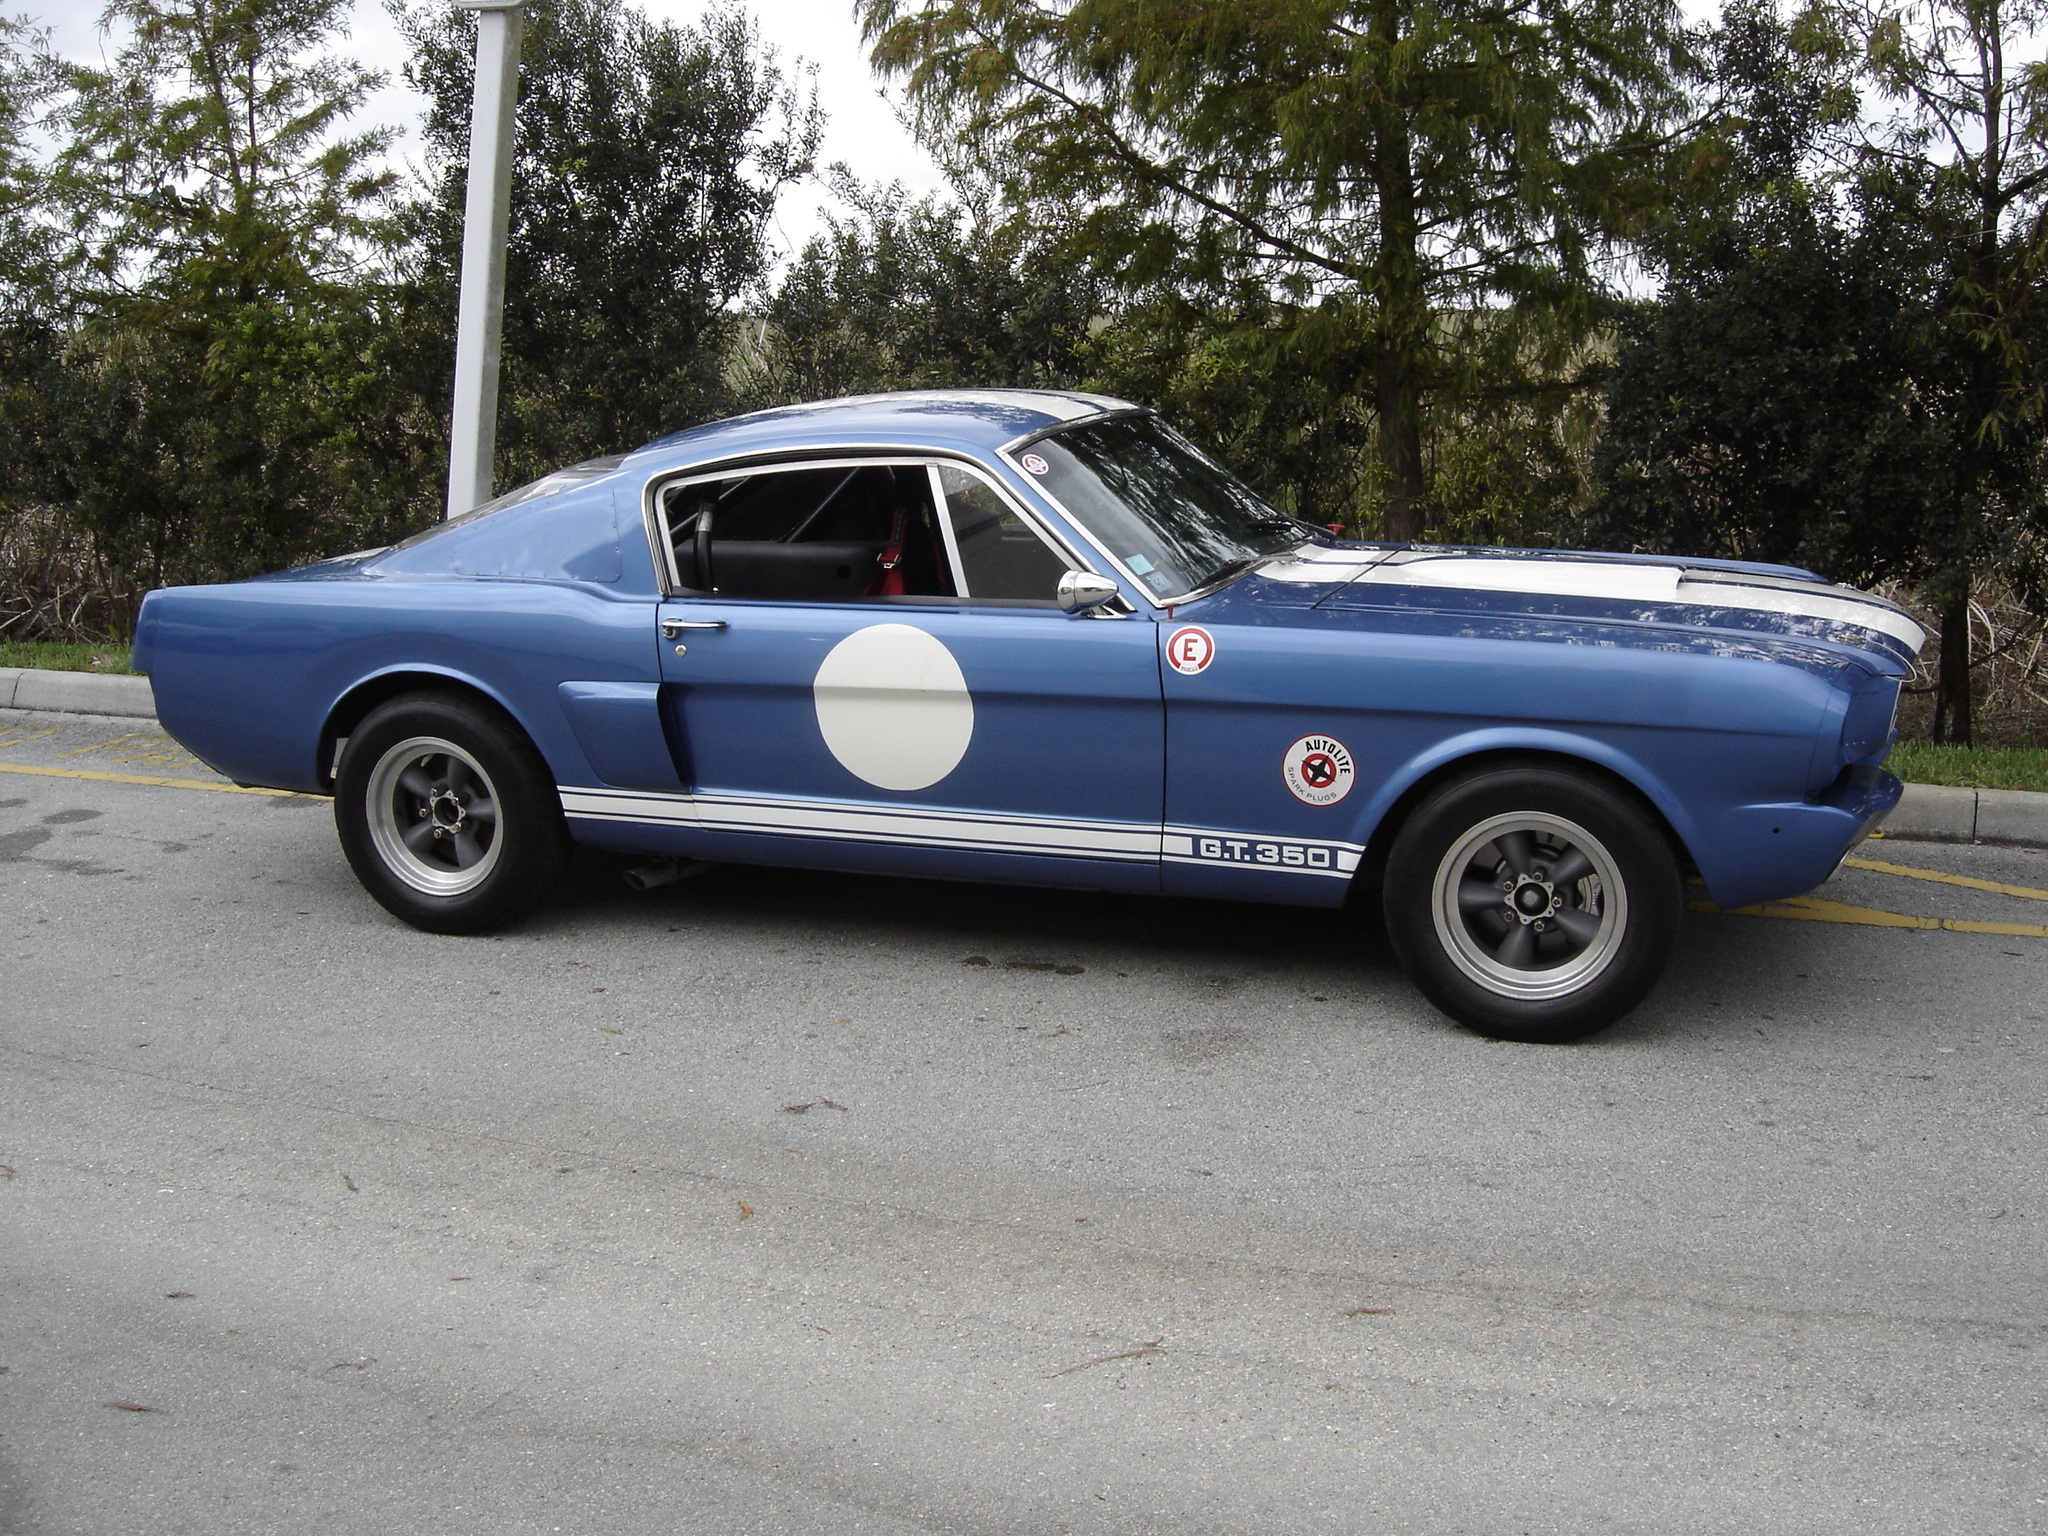 Cars Desktop Wallpaper on Cars Road 1967 Race Ford Mustang Shelby Gt350 Fastback 1965 1966 Gt